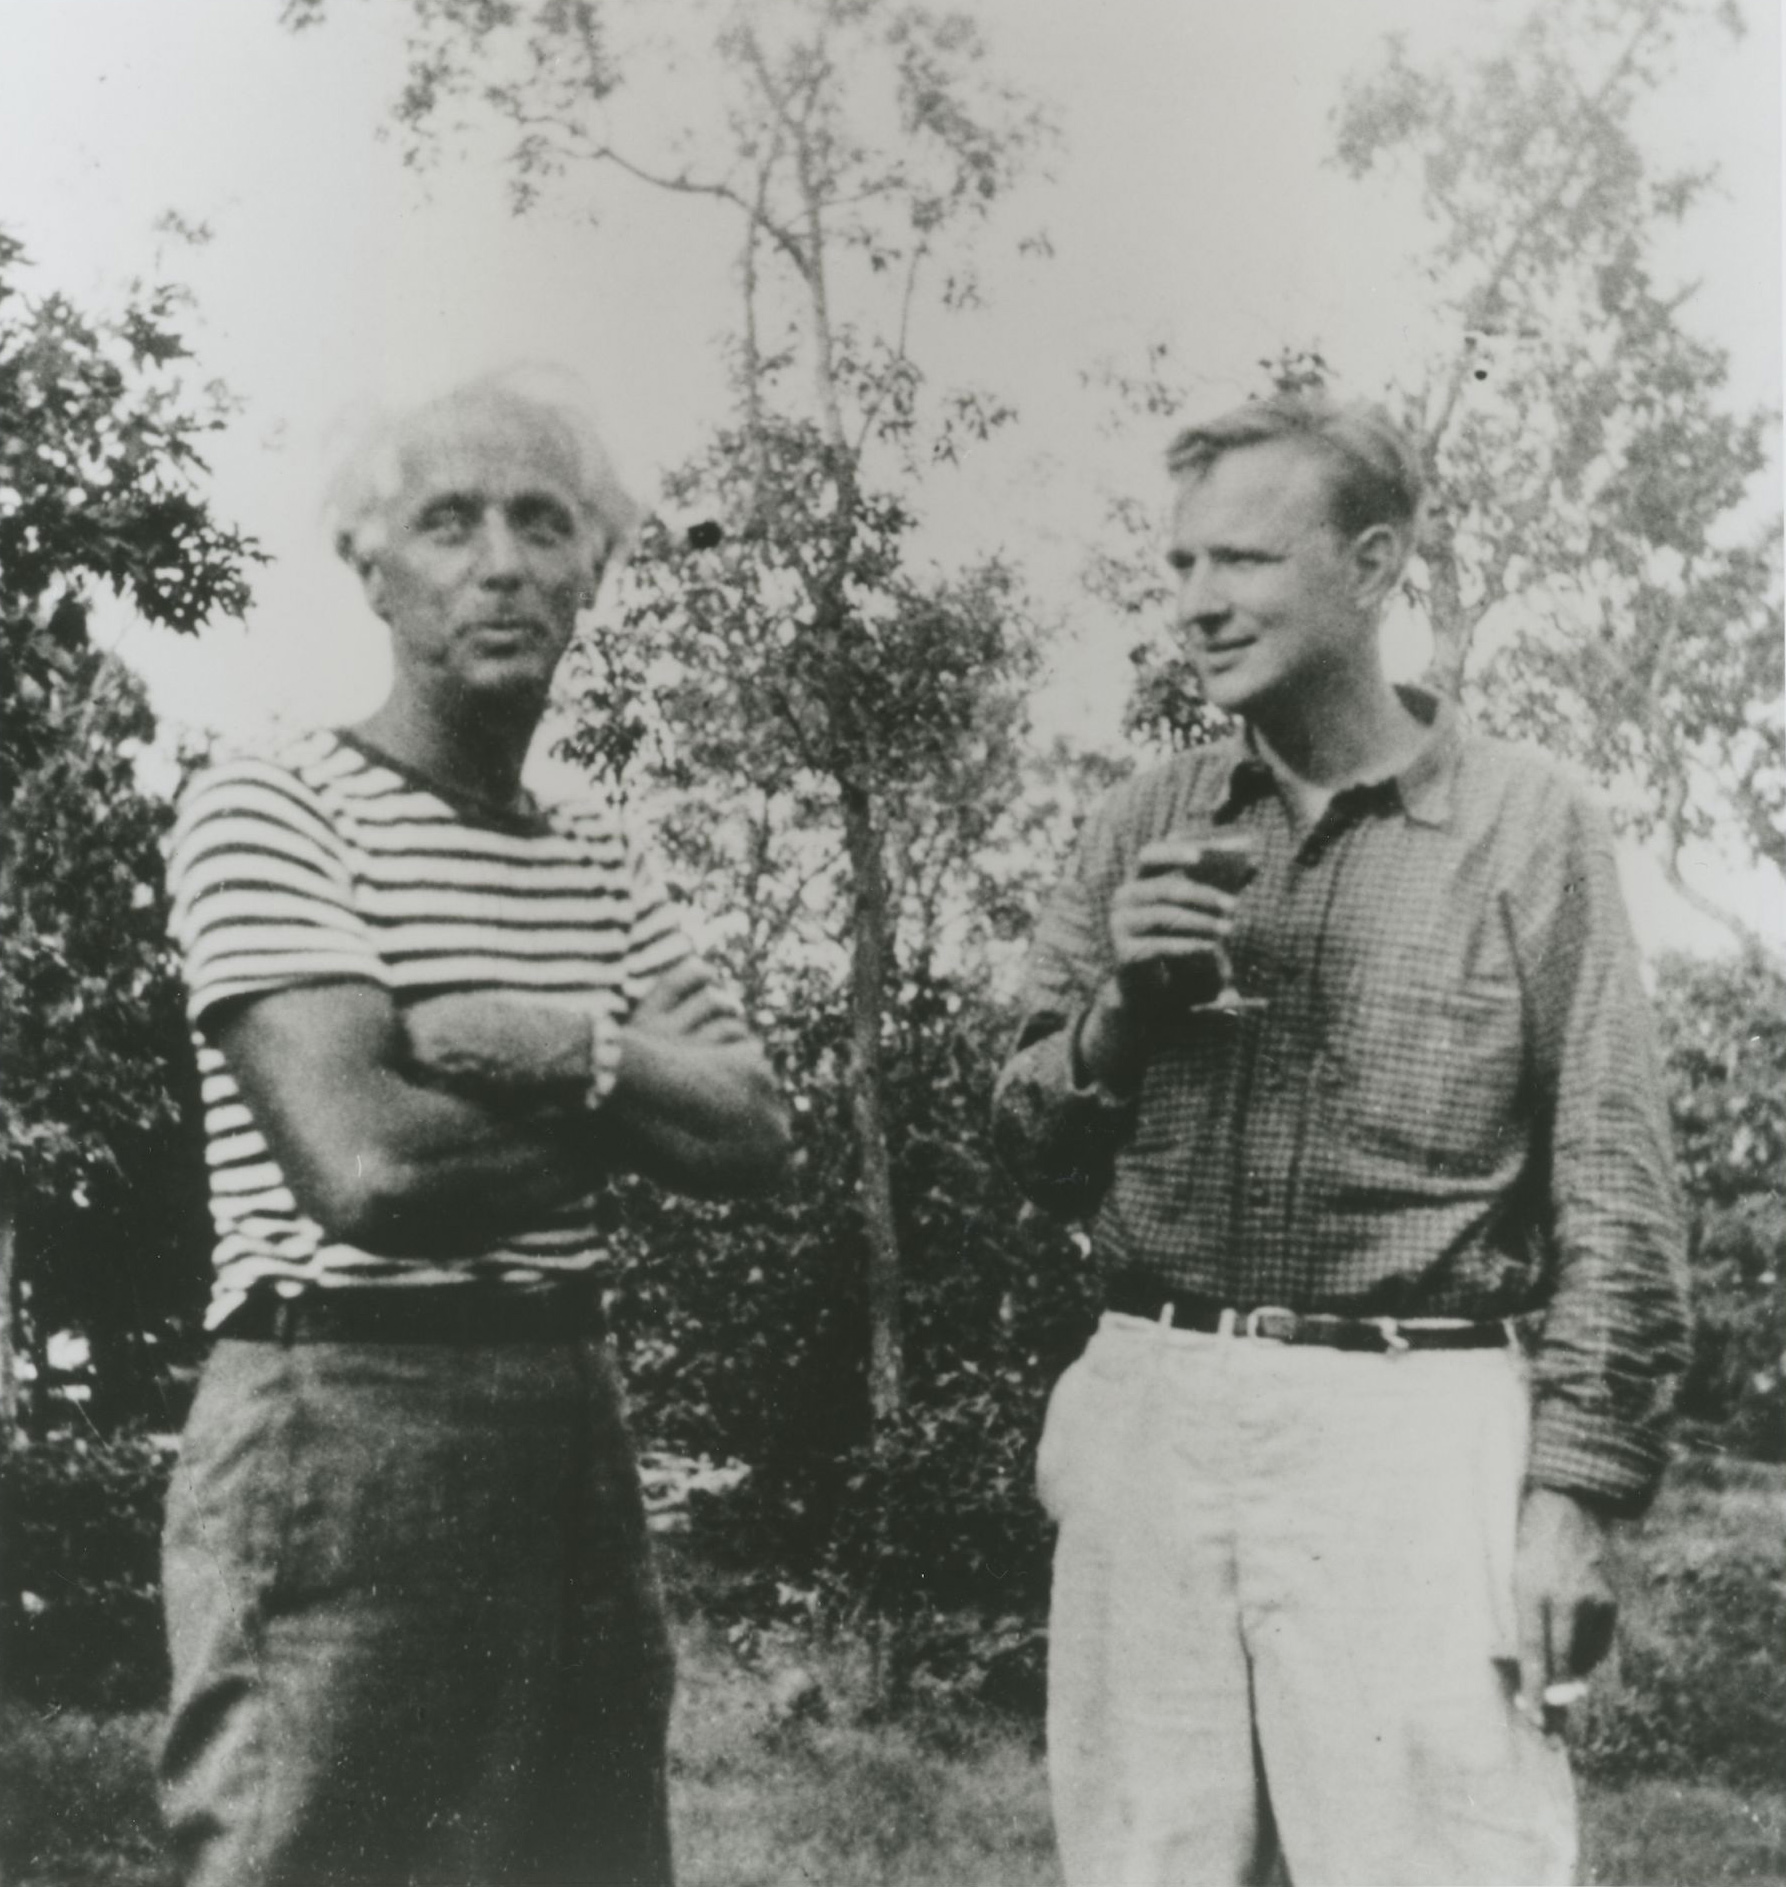 Max Ernst and Motherwell at Amagansett, N.Y., summer 1944